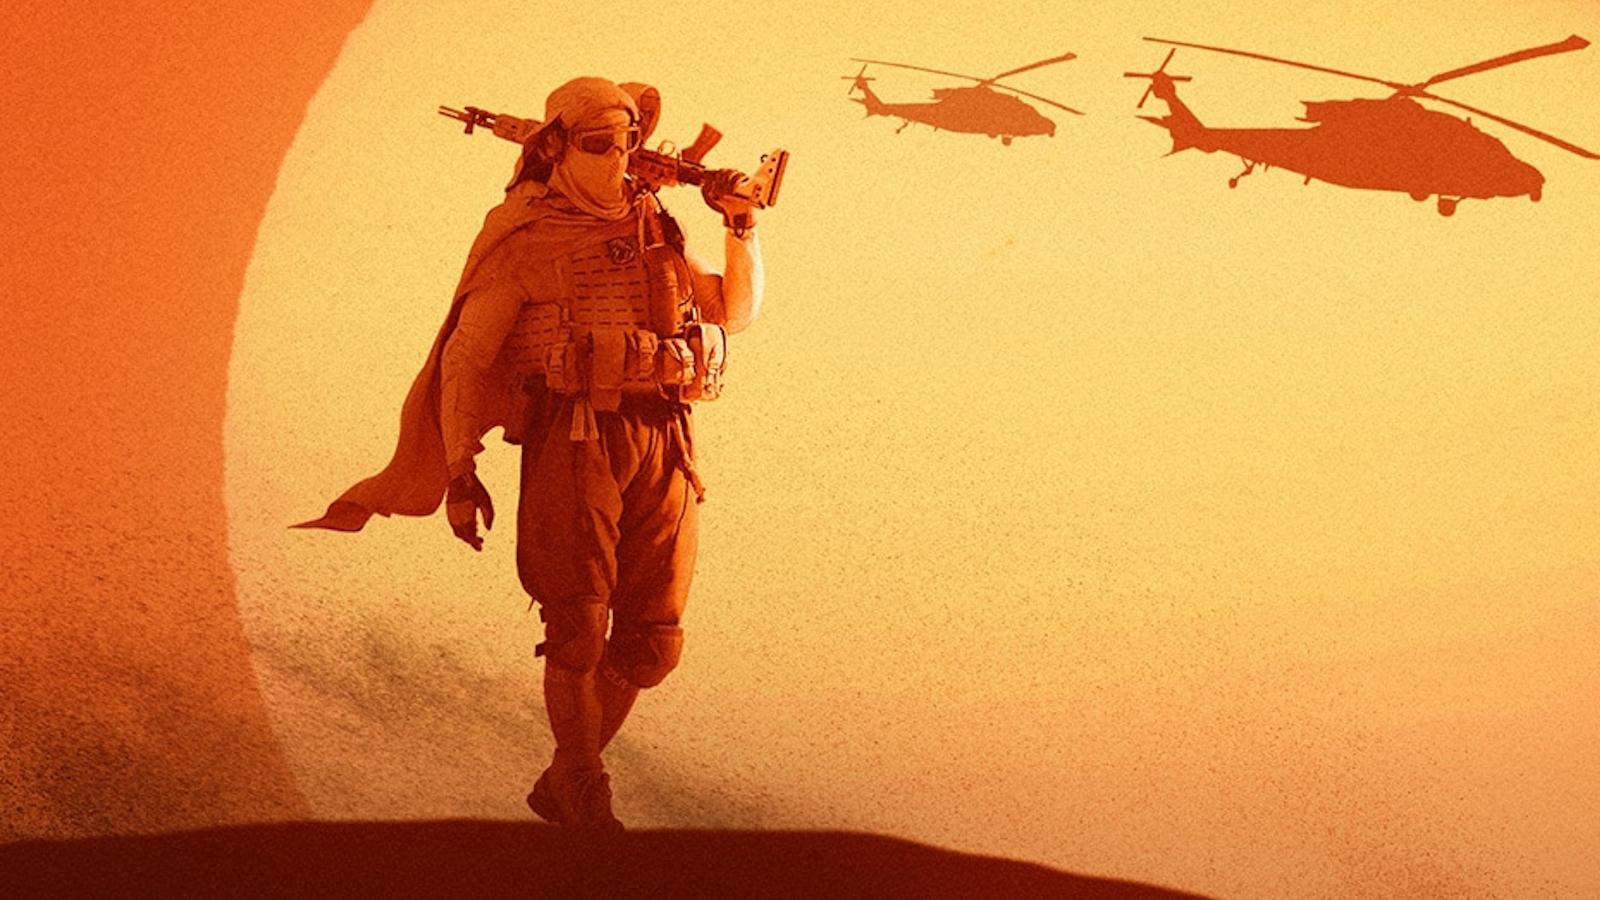 Call of Duty soldier slinging gun over shoulder in desert with helicopters in background.